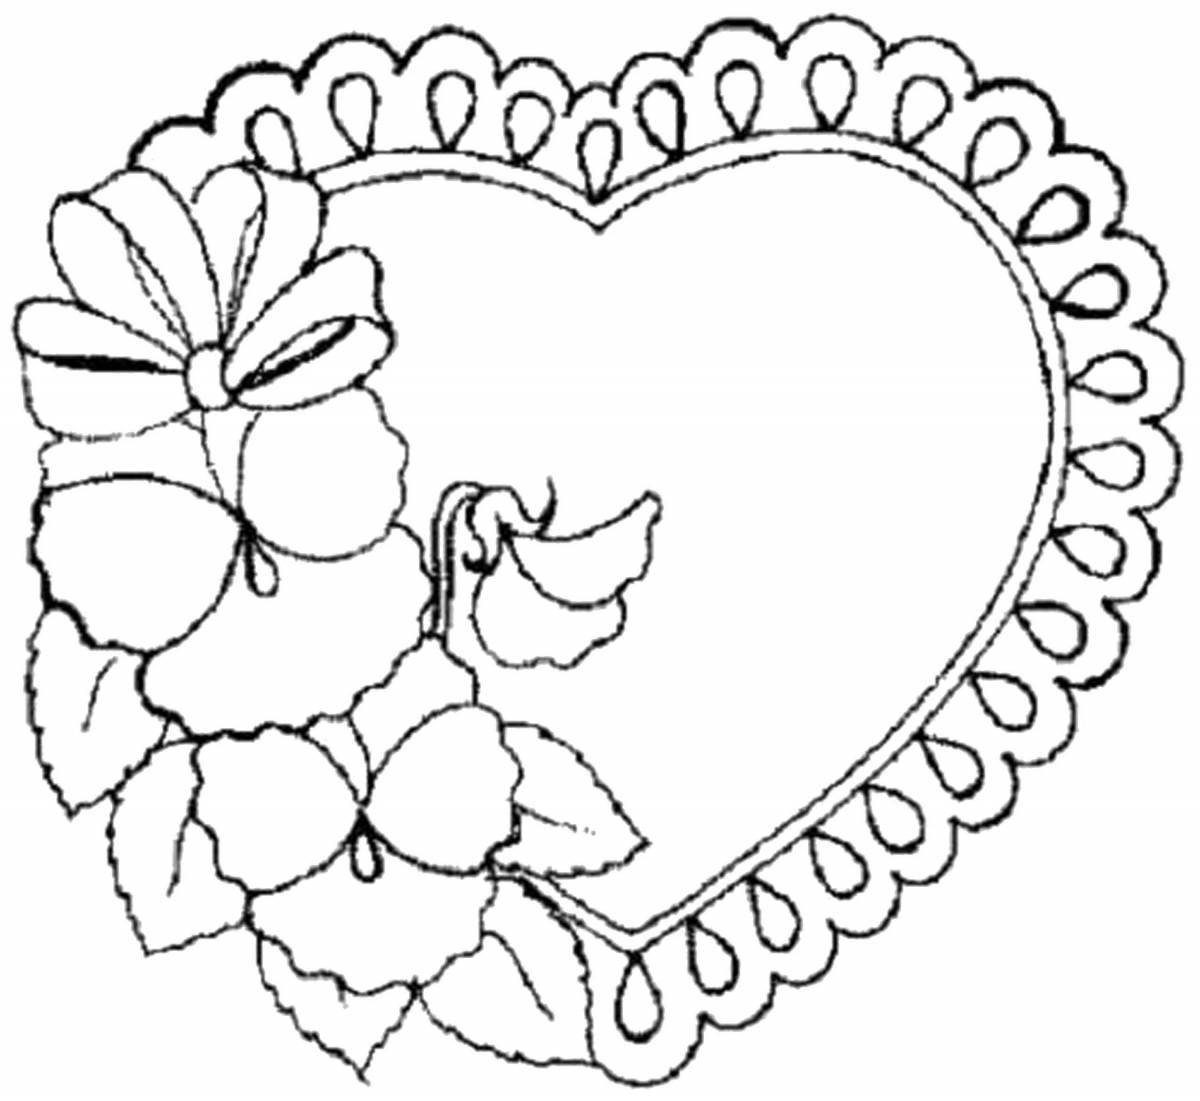 Adorable heart and flower coloring page